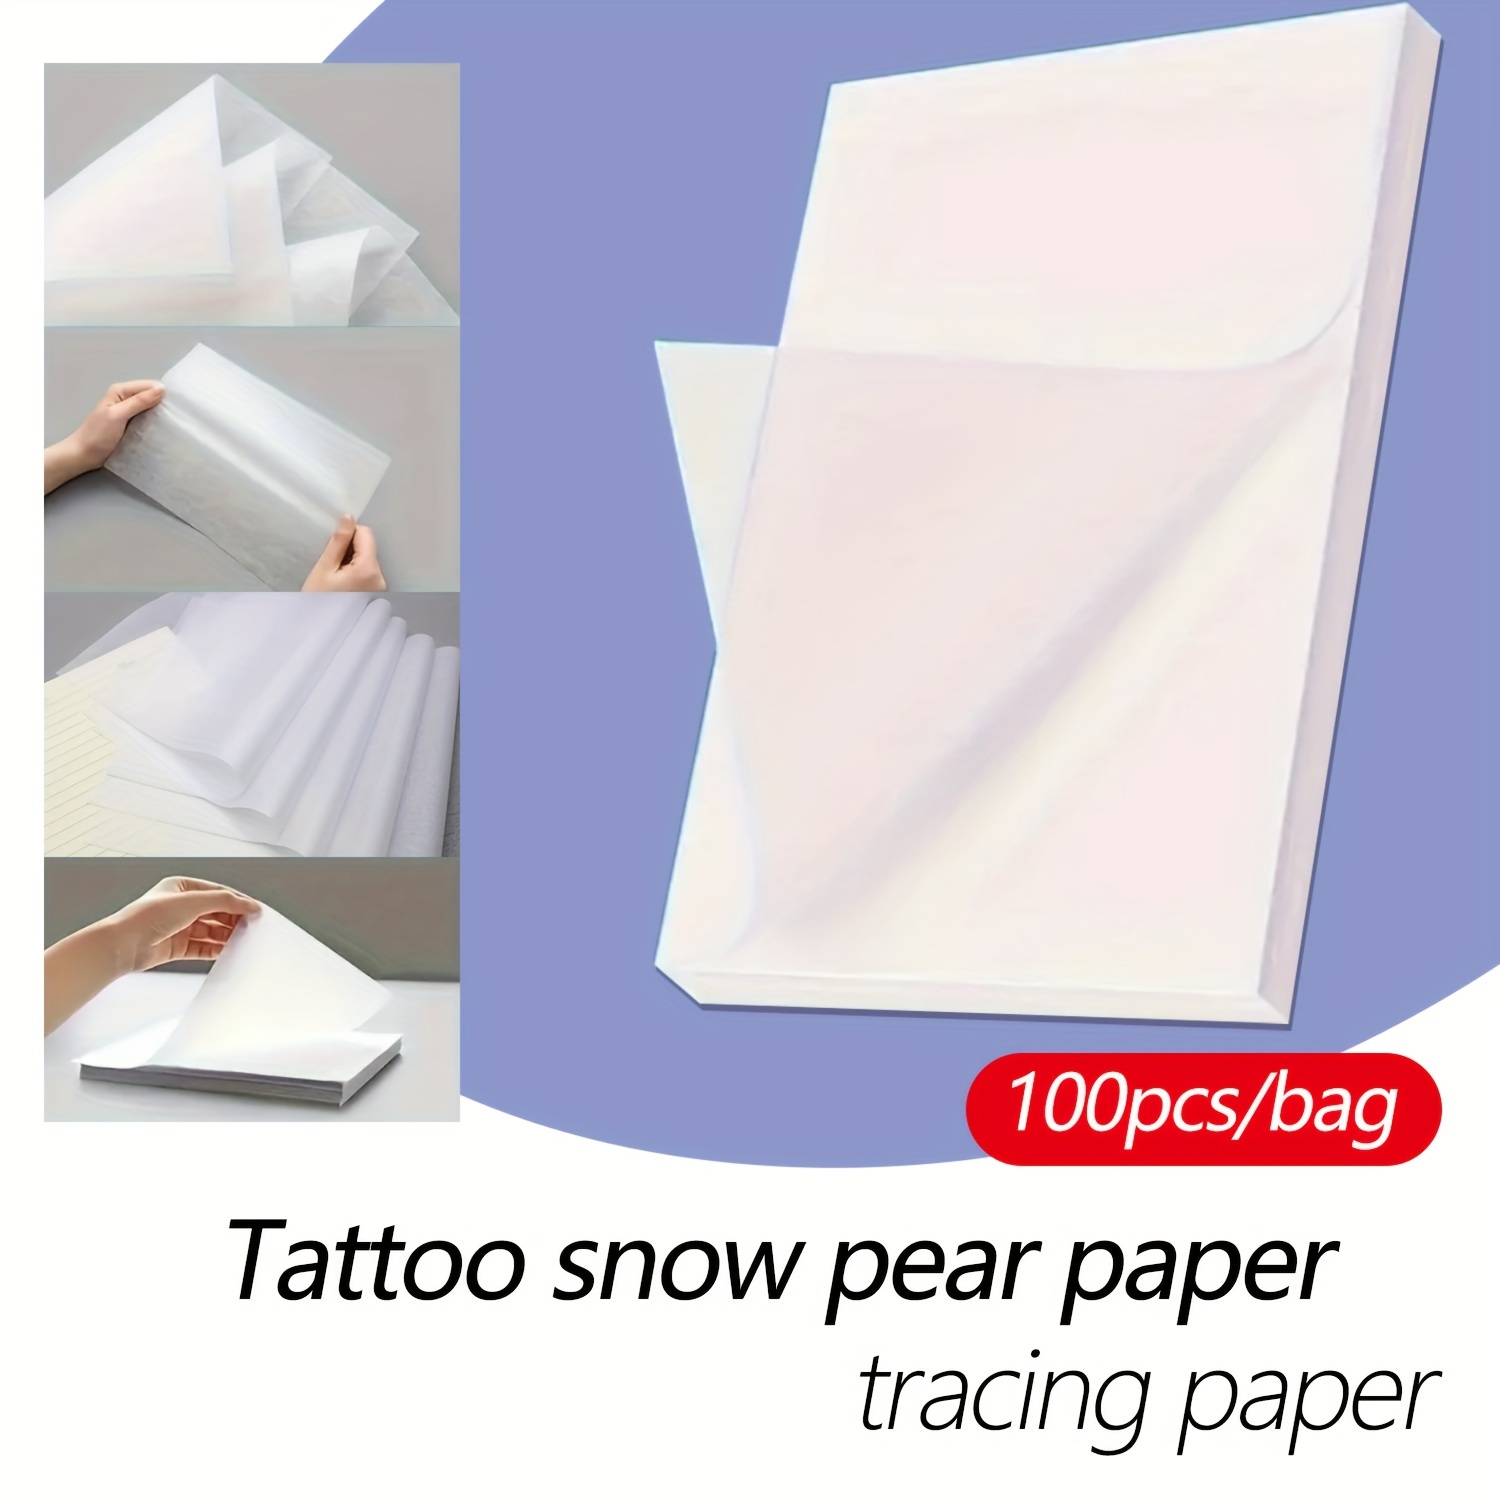 

100-pack A4 Tattoo Tracing Paper, Snow Pear Transparency Sheets – For Full Back Tattoos, Smooth & Durable Stencil Copying Paper